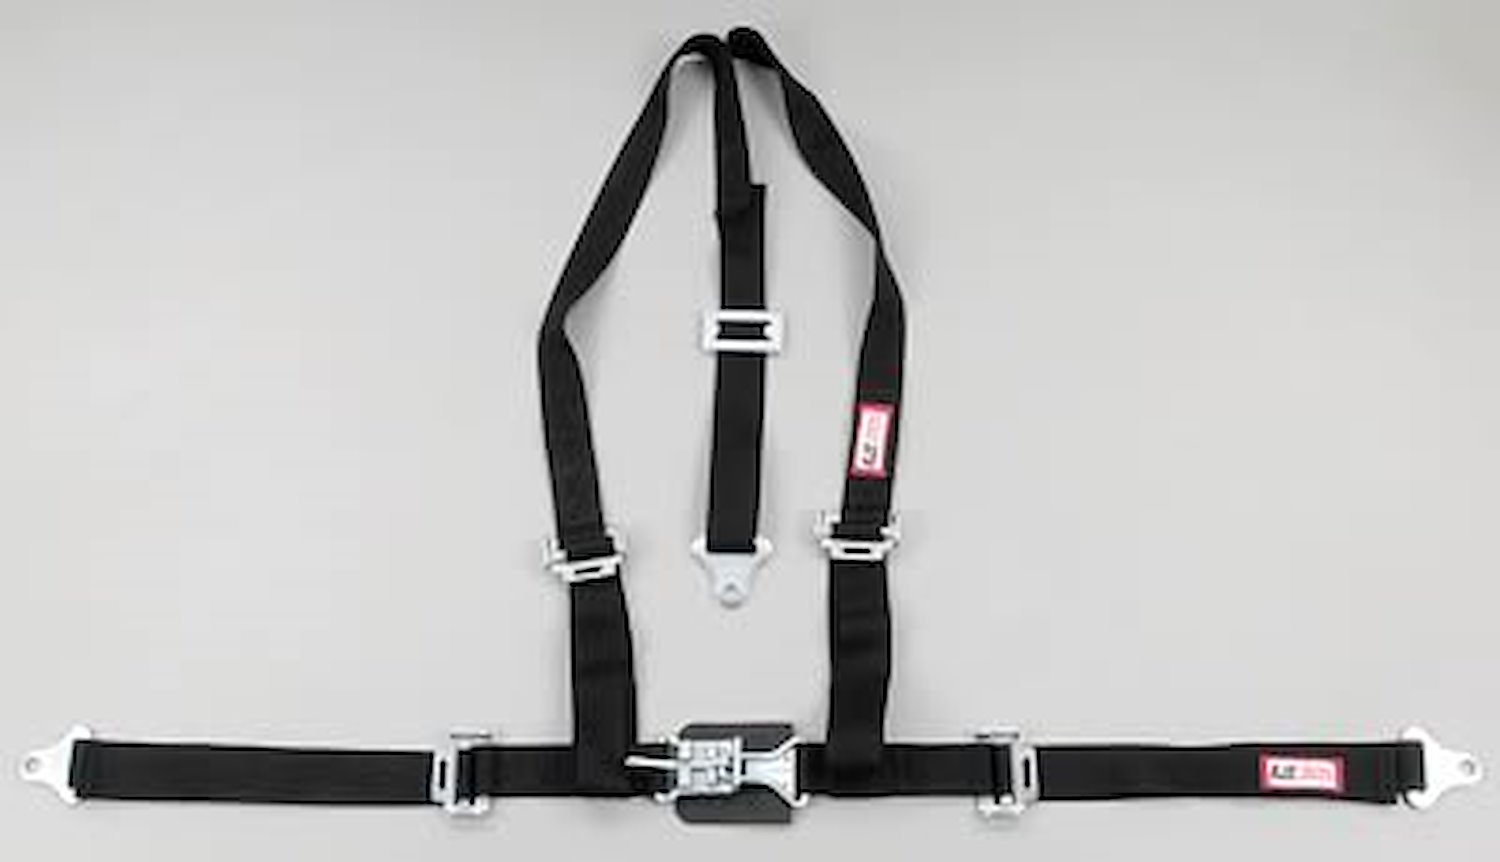 NON-SFI L&L HARNESS 2 PULL UP Lap Belt SEWN IN 2 S.H. Y FLOOR Mount ALL WRAP ENDS GRAY